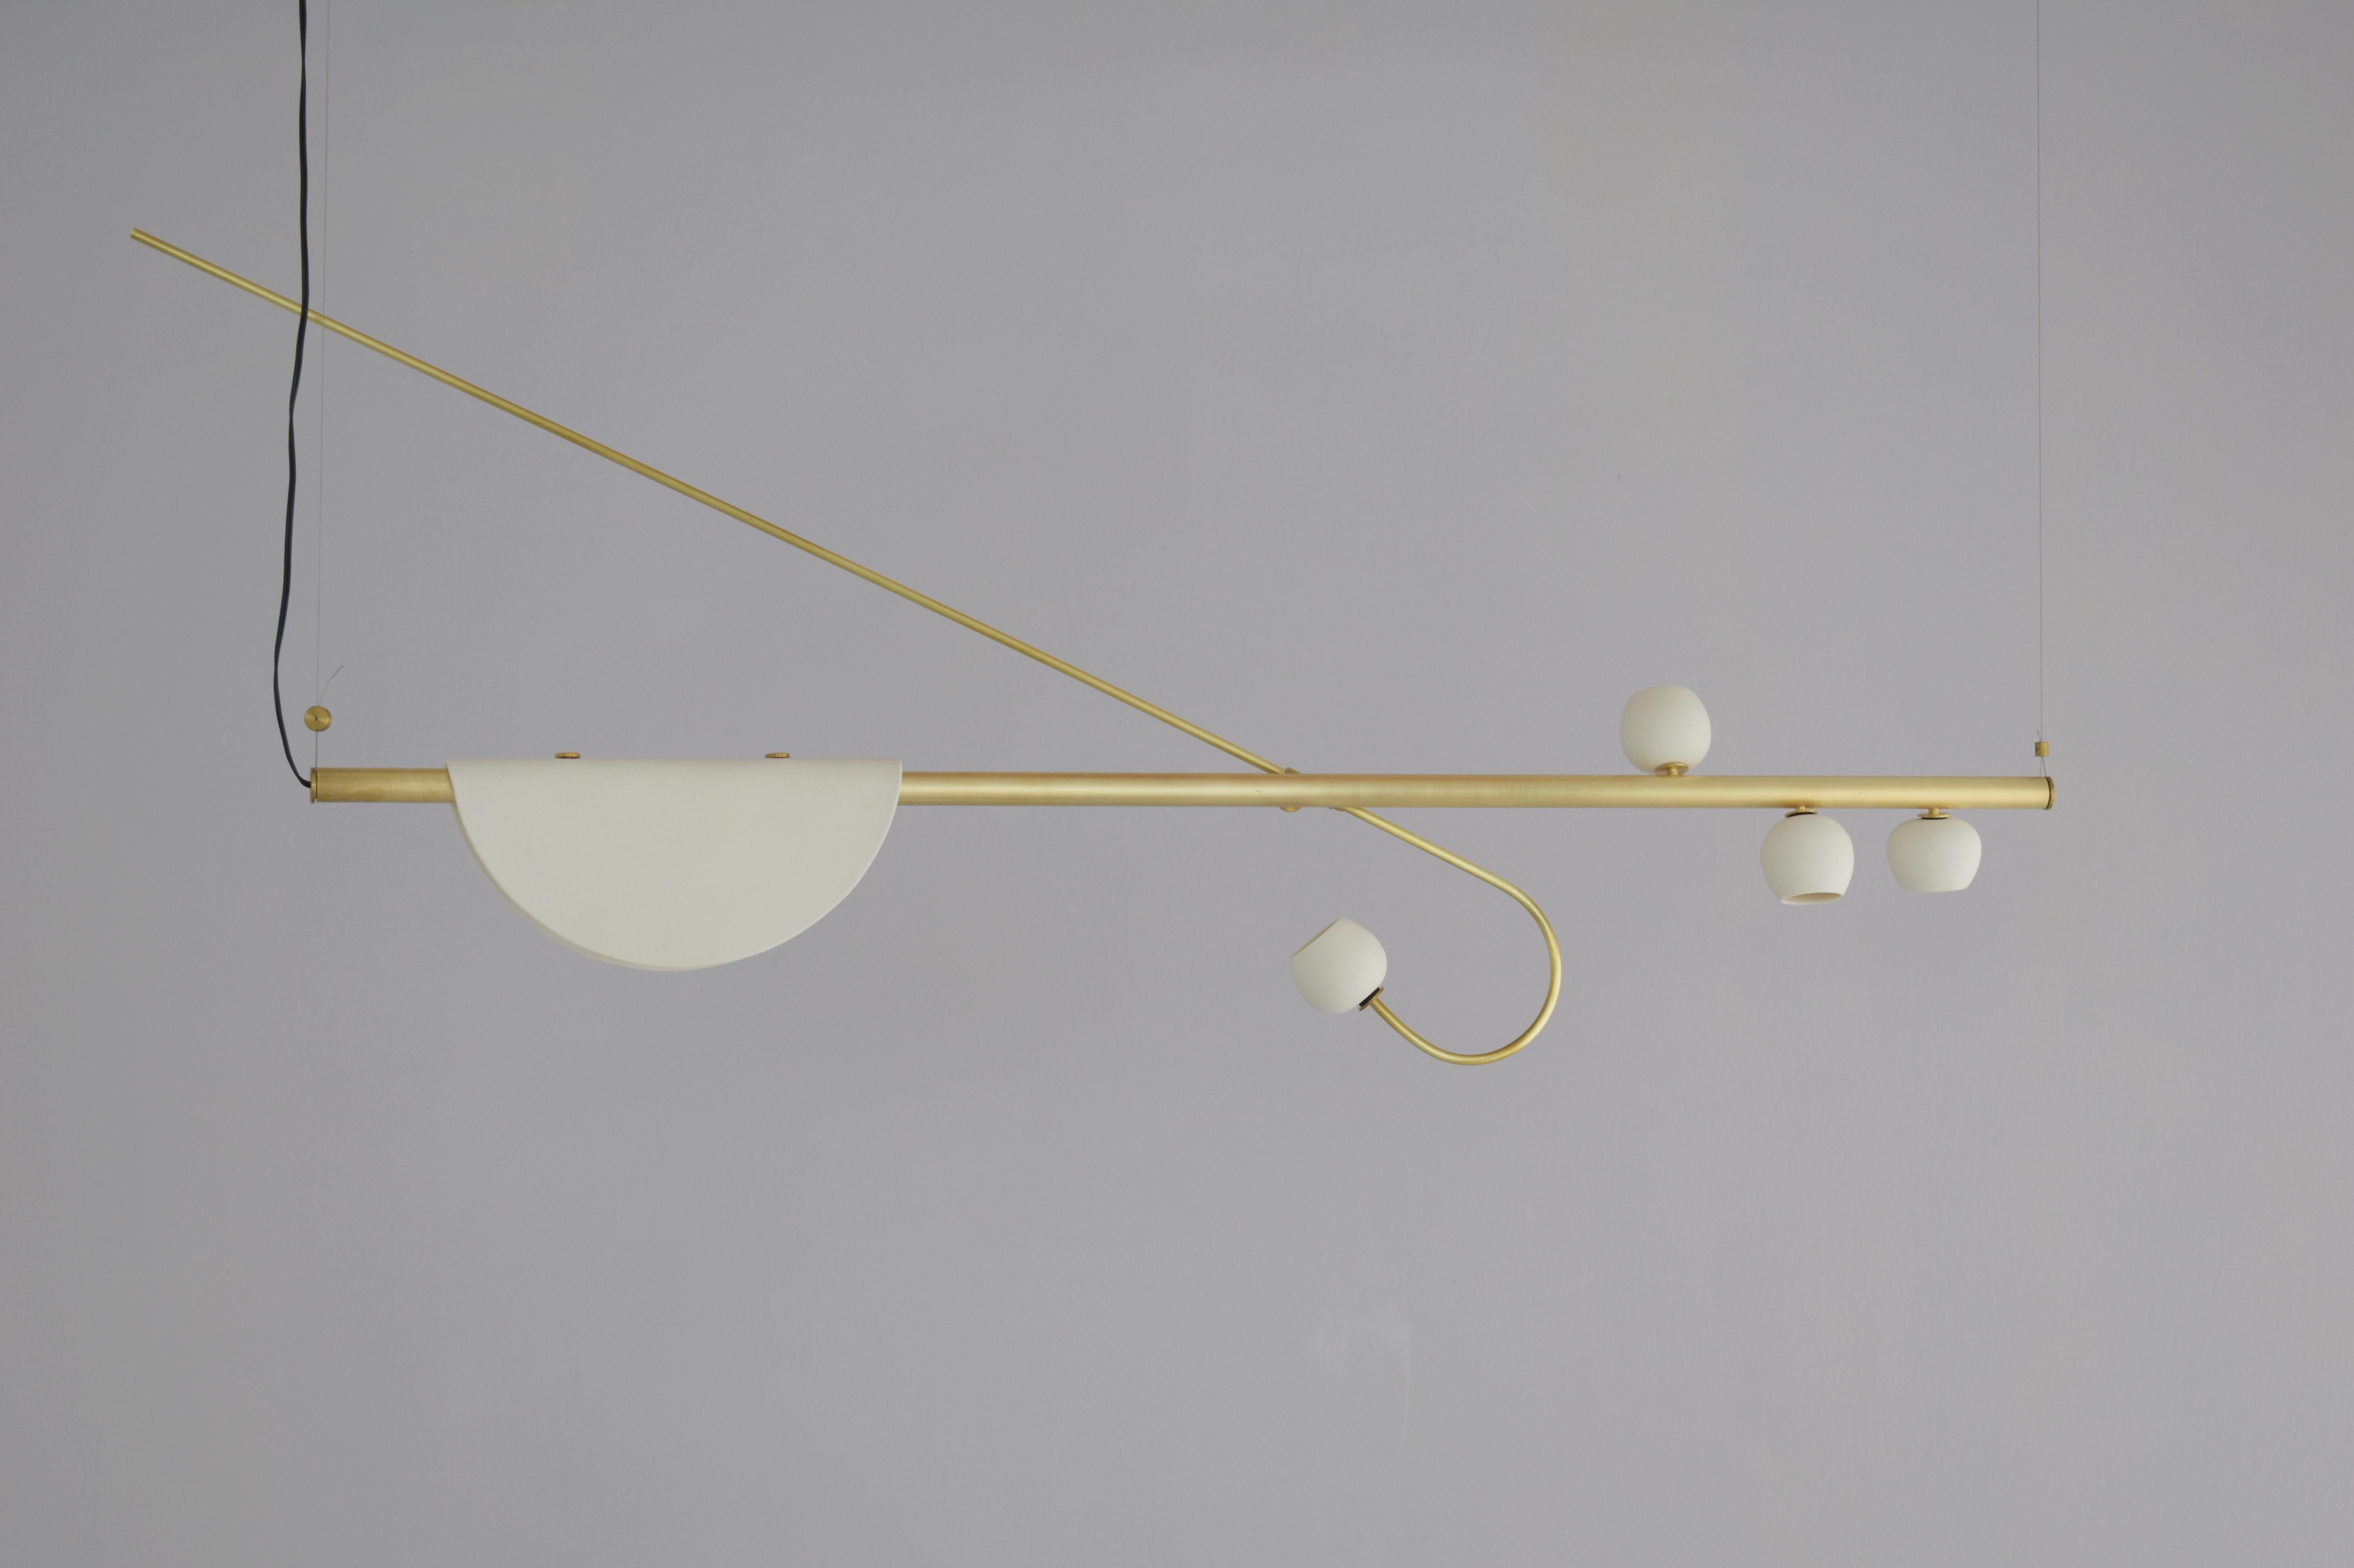 Brass sculpted light suspension - My Queen IV - Signed Periclis Frementitis

Dimensions: 140 x 65 x 15 cm
Materials: Sculpted brass, porcelain, LED bulbs.
Limited Edition of 7 pieces per year

Bulb specifications: G4 LED - 3W - 12V. 300lm -